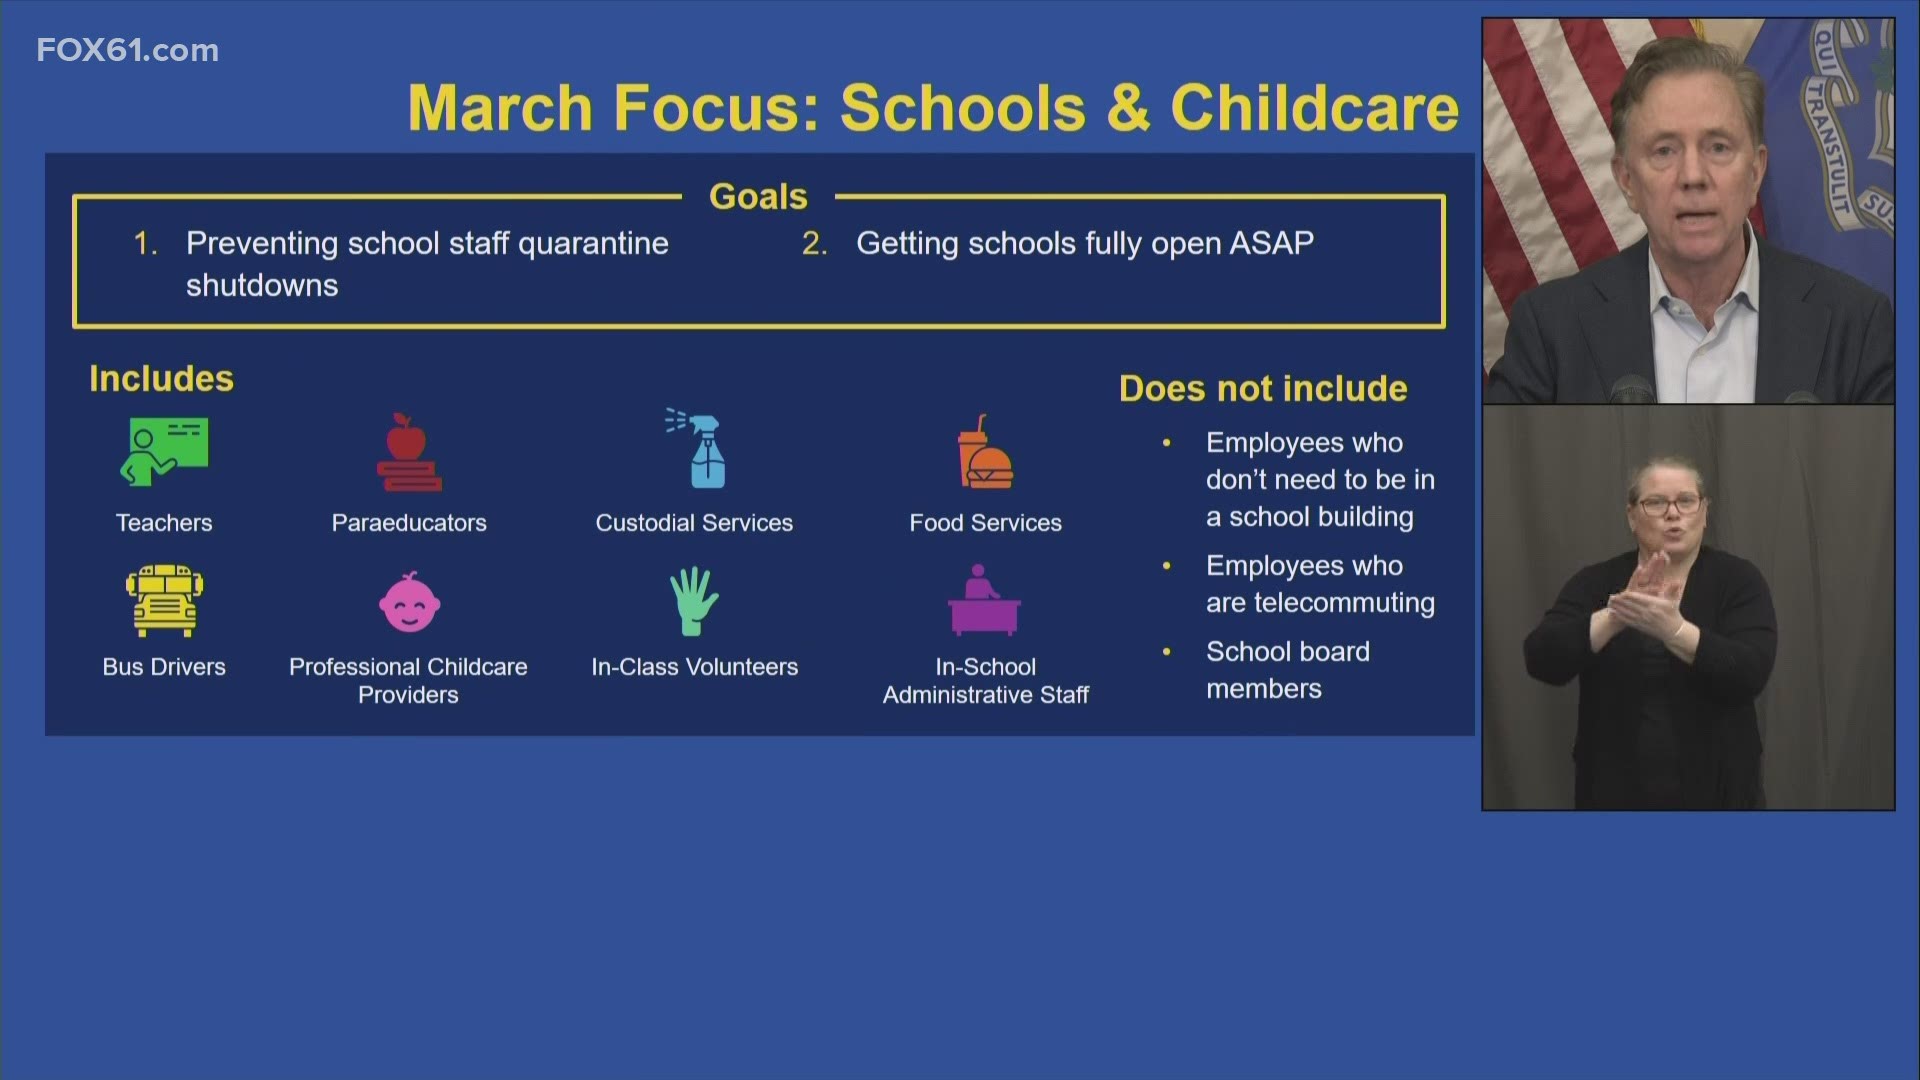 Educators and childcare providers to have dedicated clinics in March